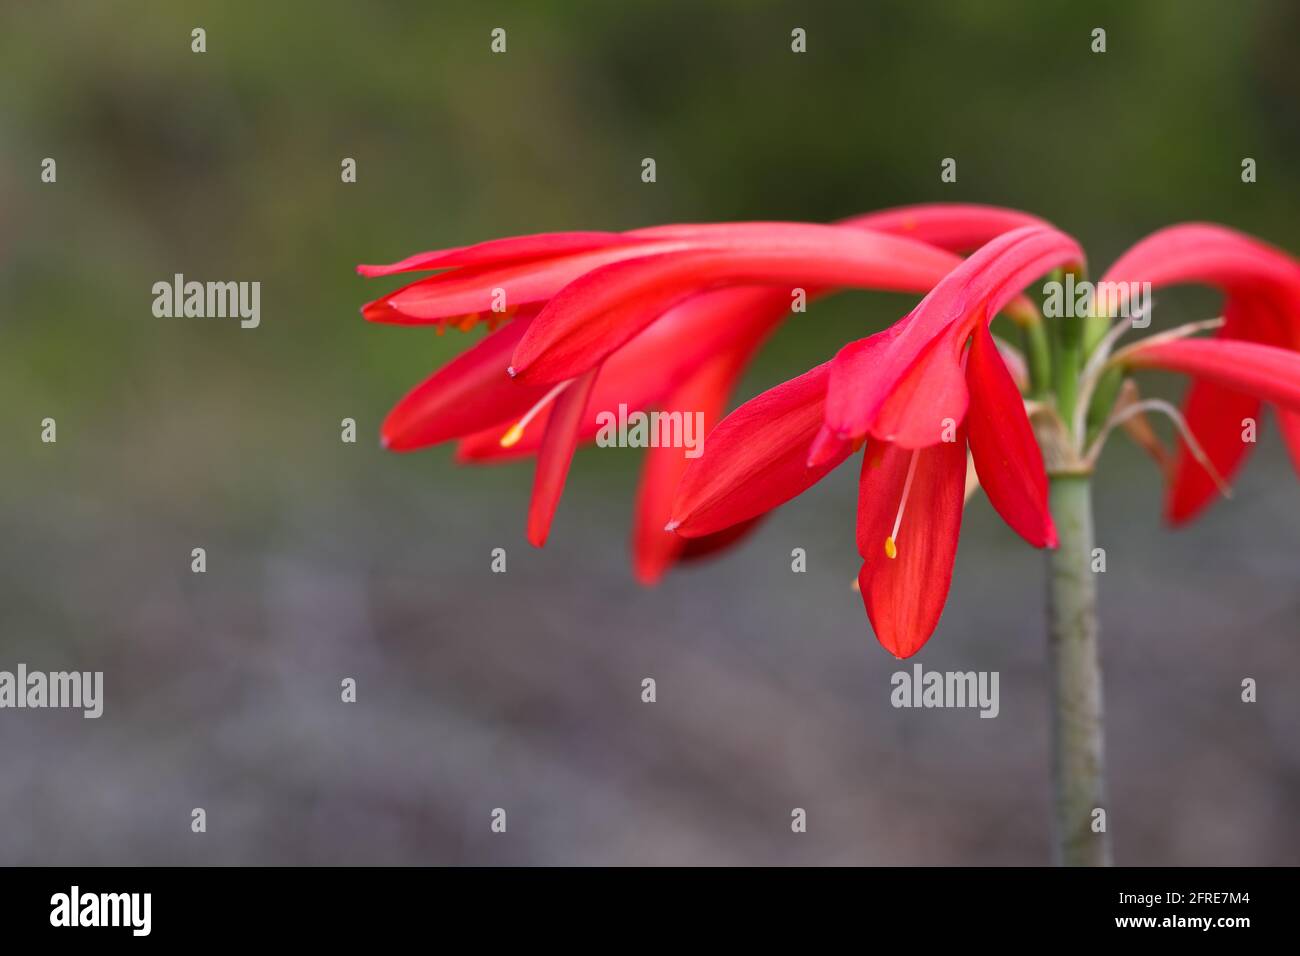 Fire Lily Flowers On Stalk Close-up (Cyrtanthus ventricosus) Stock Photo